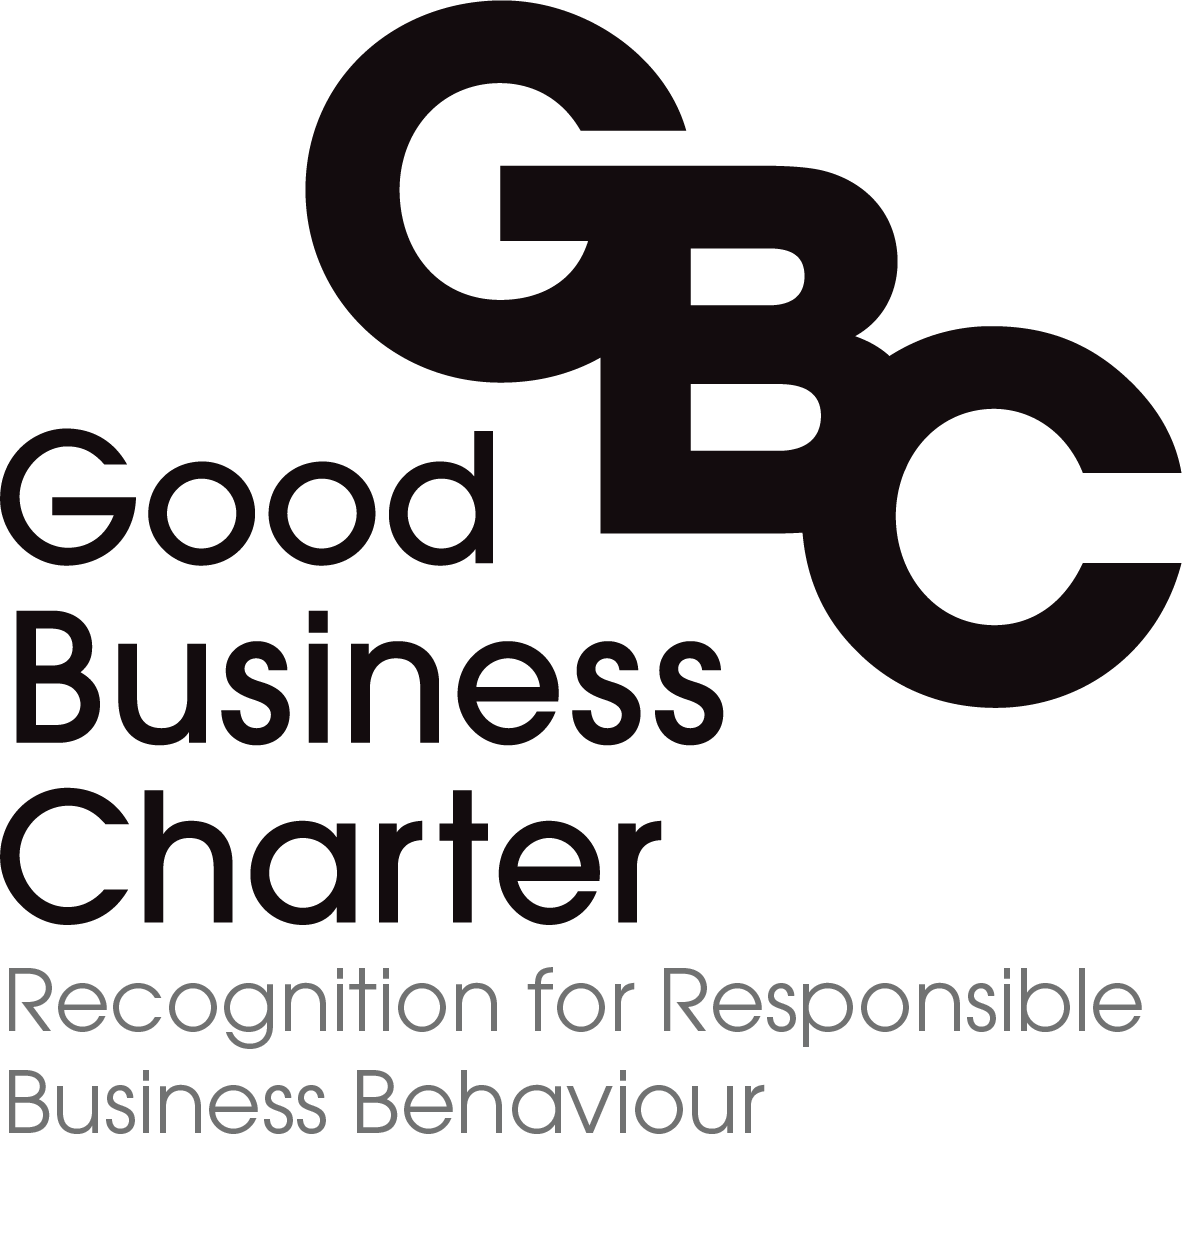 Accredited with the Good Business Charter